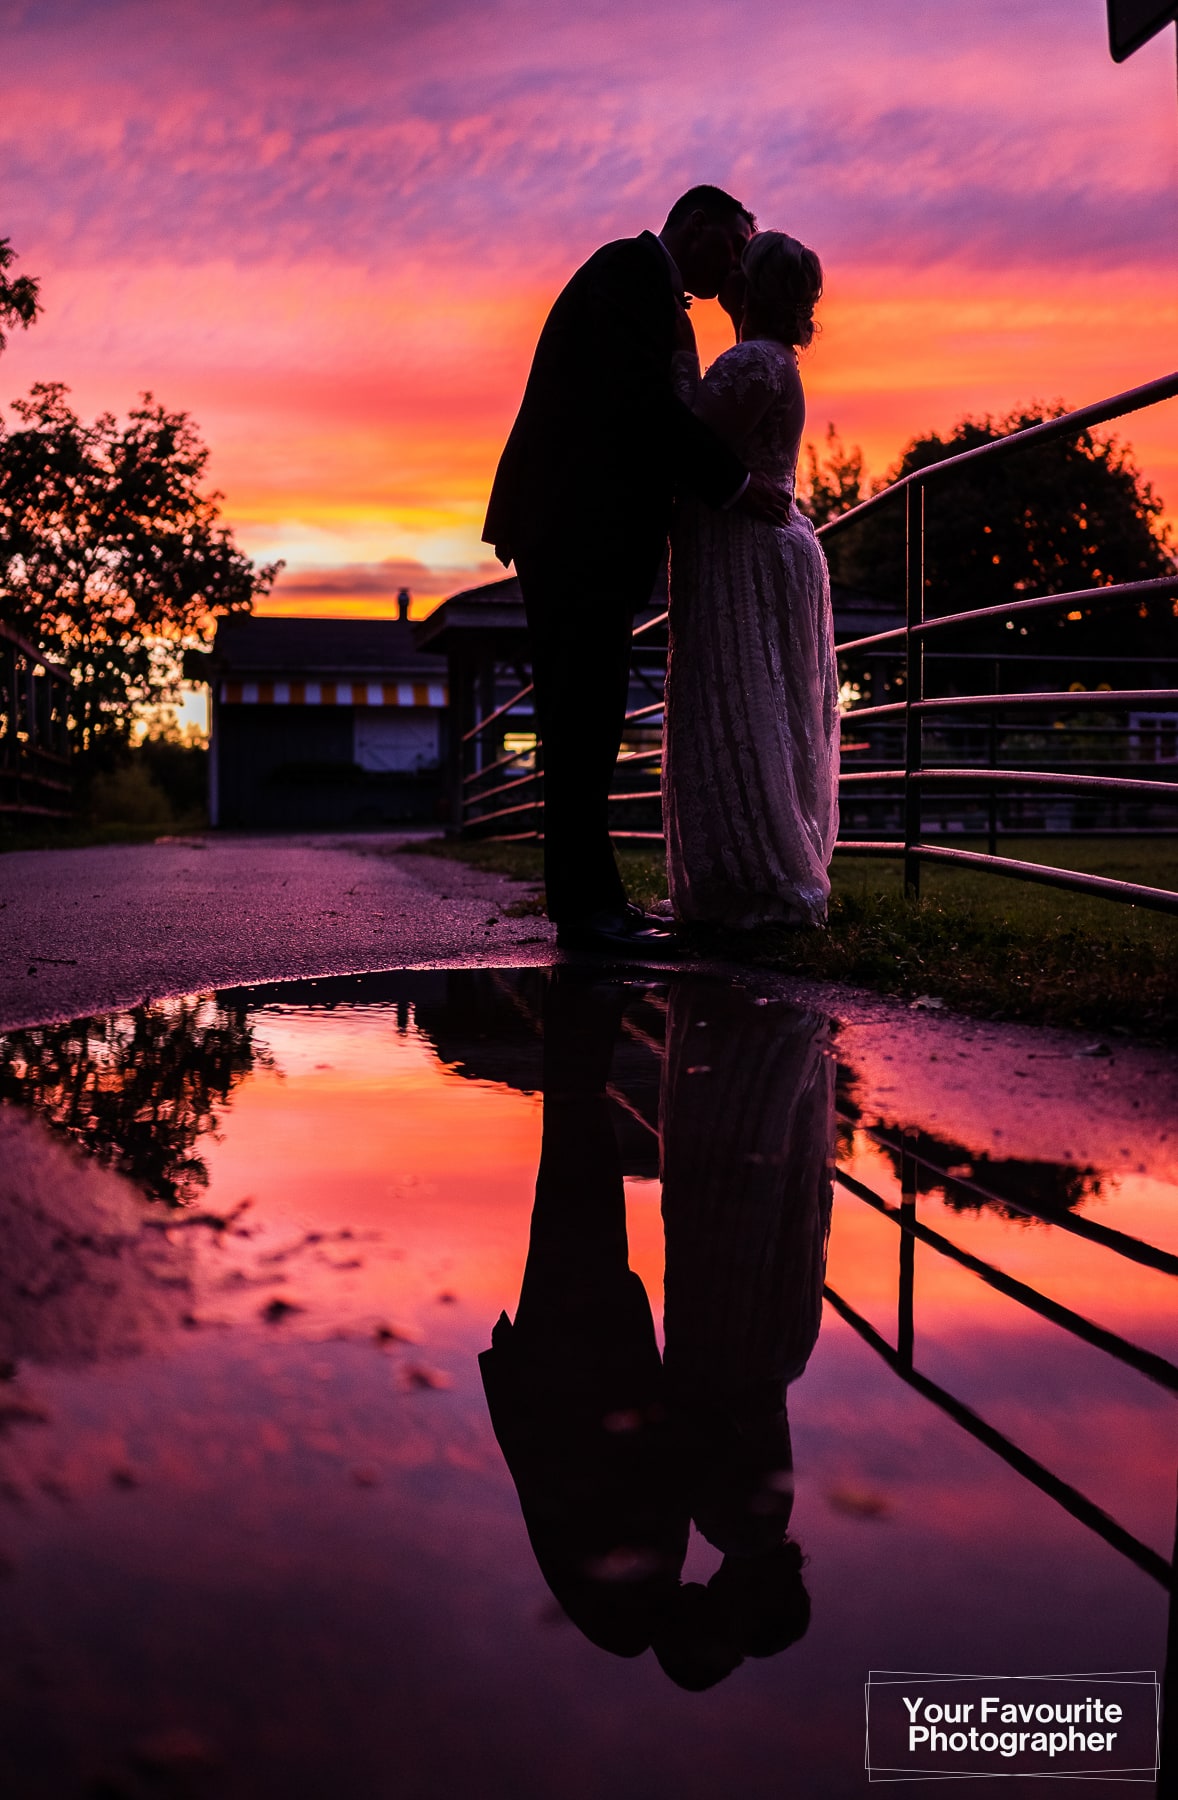 Sunset silhouette photo of bride and groom